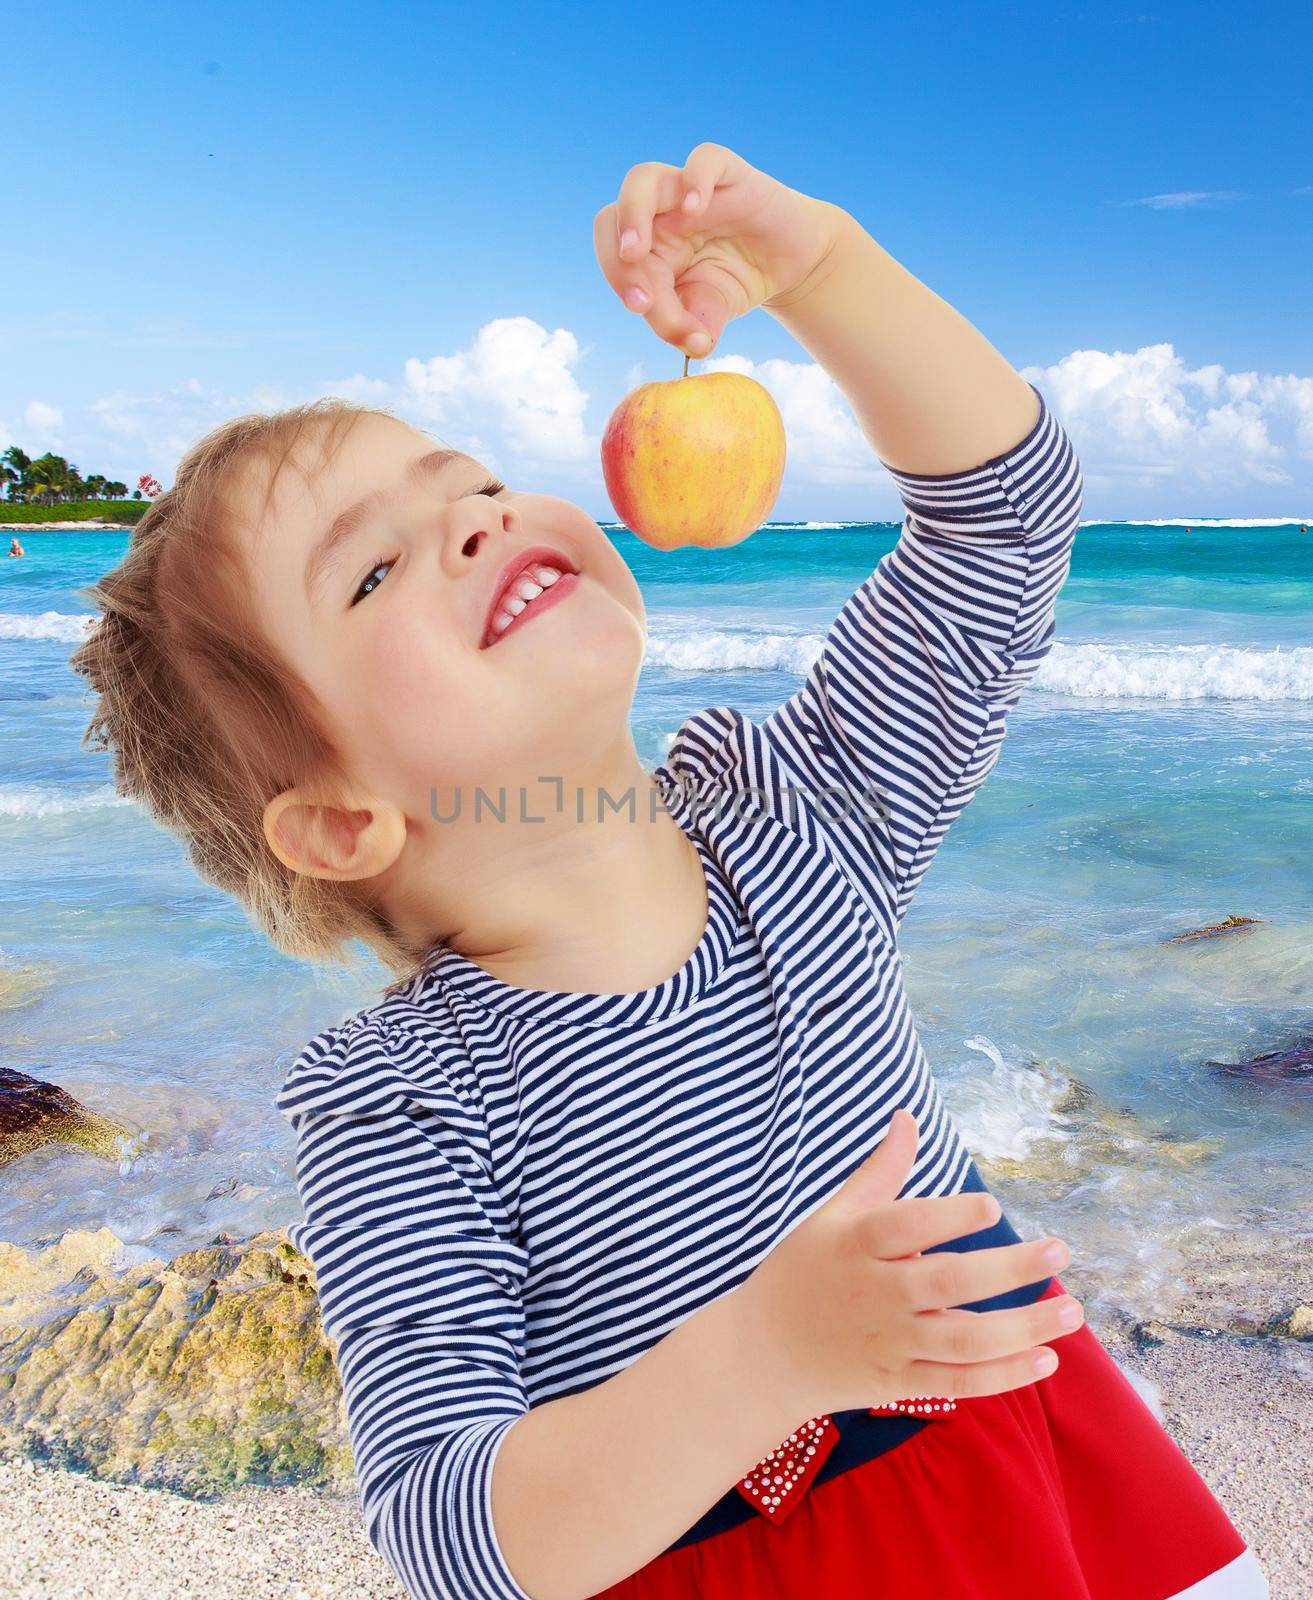 Nice little blonde girl with a red bow on the head holding the tail in front of the face of a delicious Apple . close-up.On the background of white, sandy beaches, blue sky and clouds.